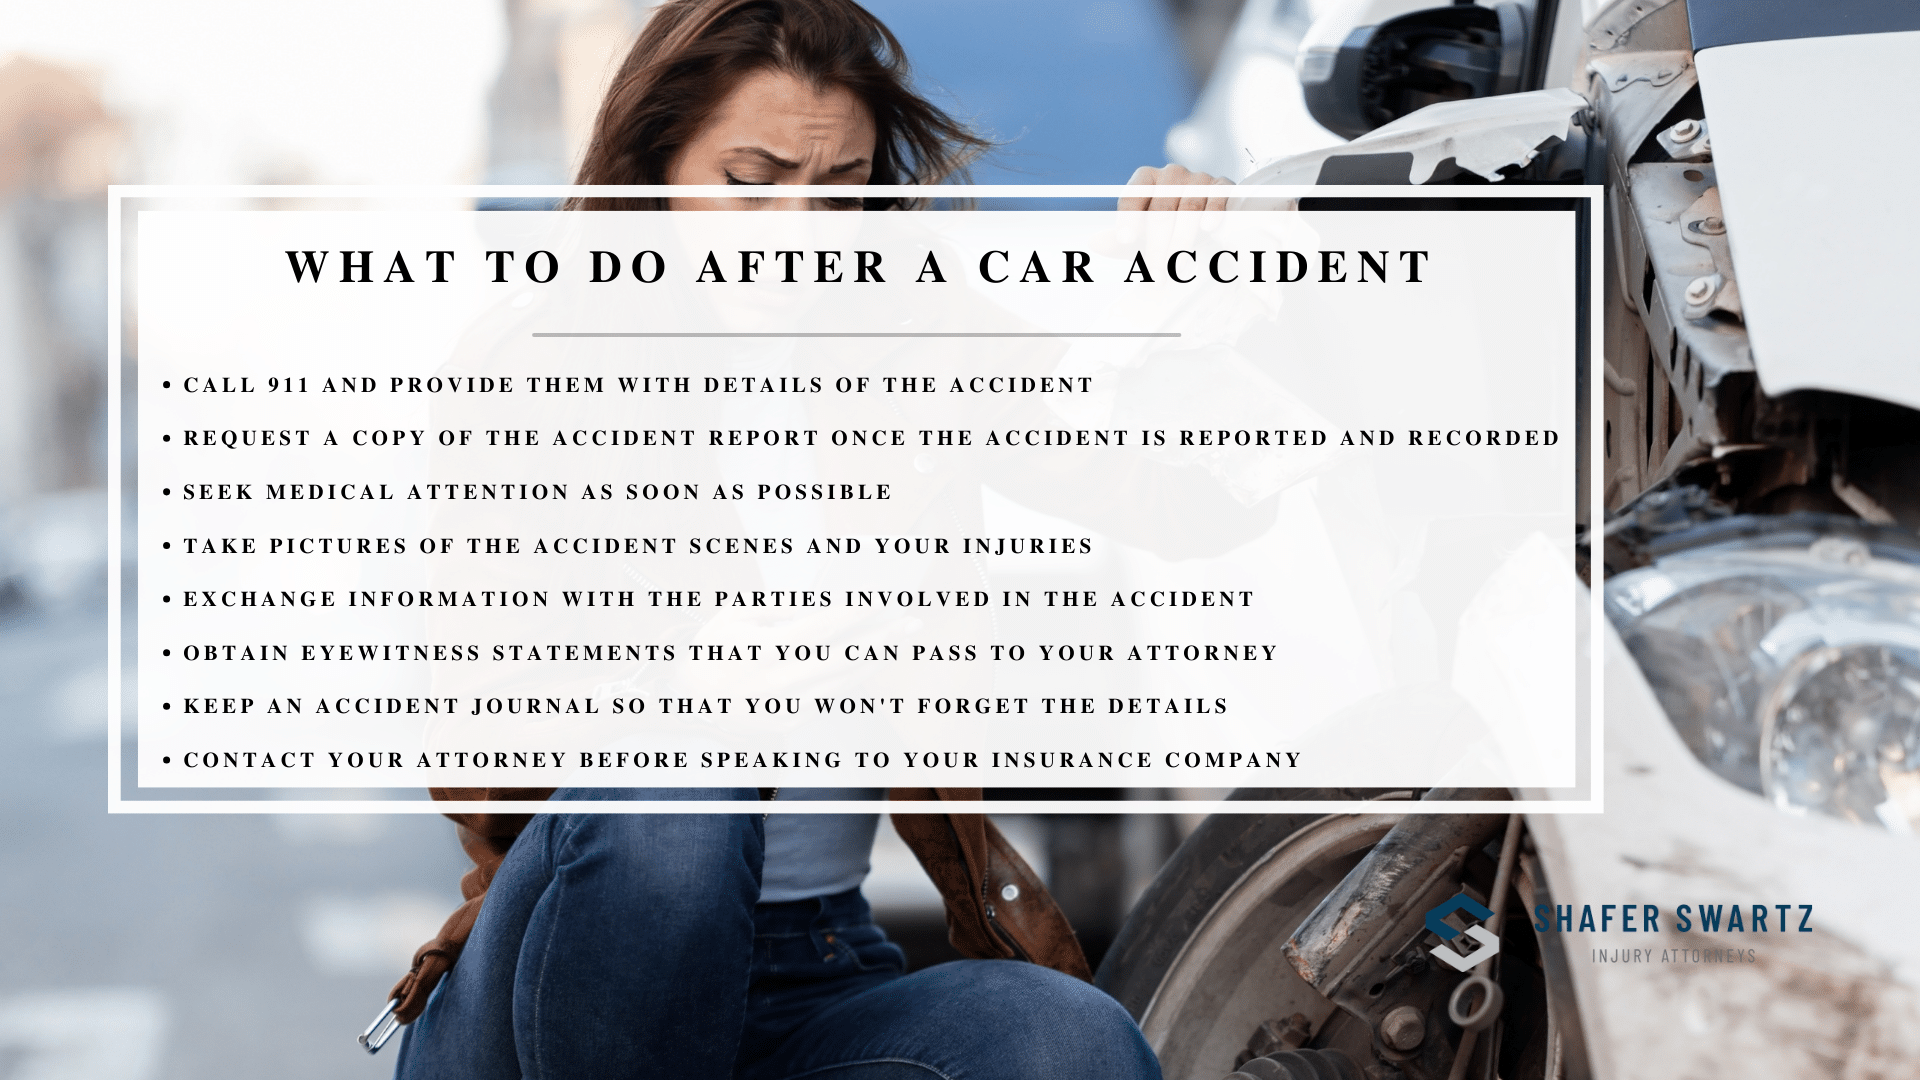 Infographic image of what to do after a car accident